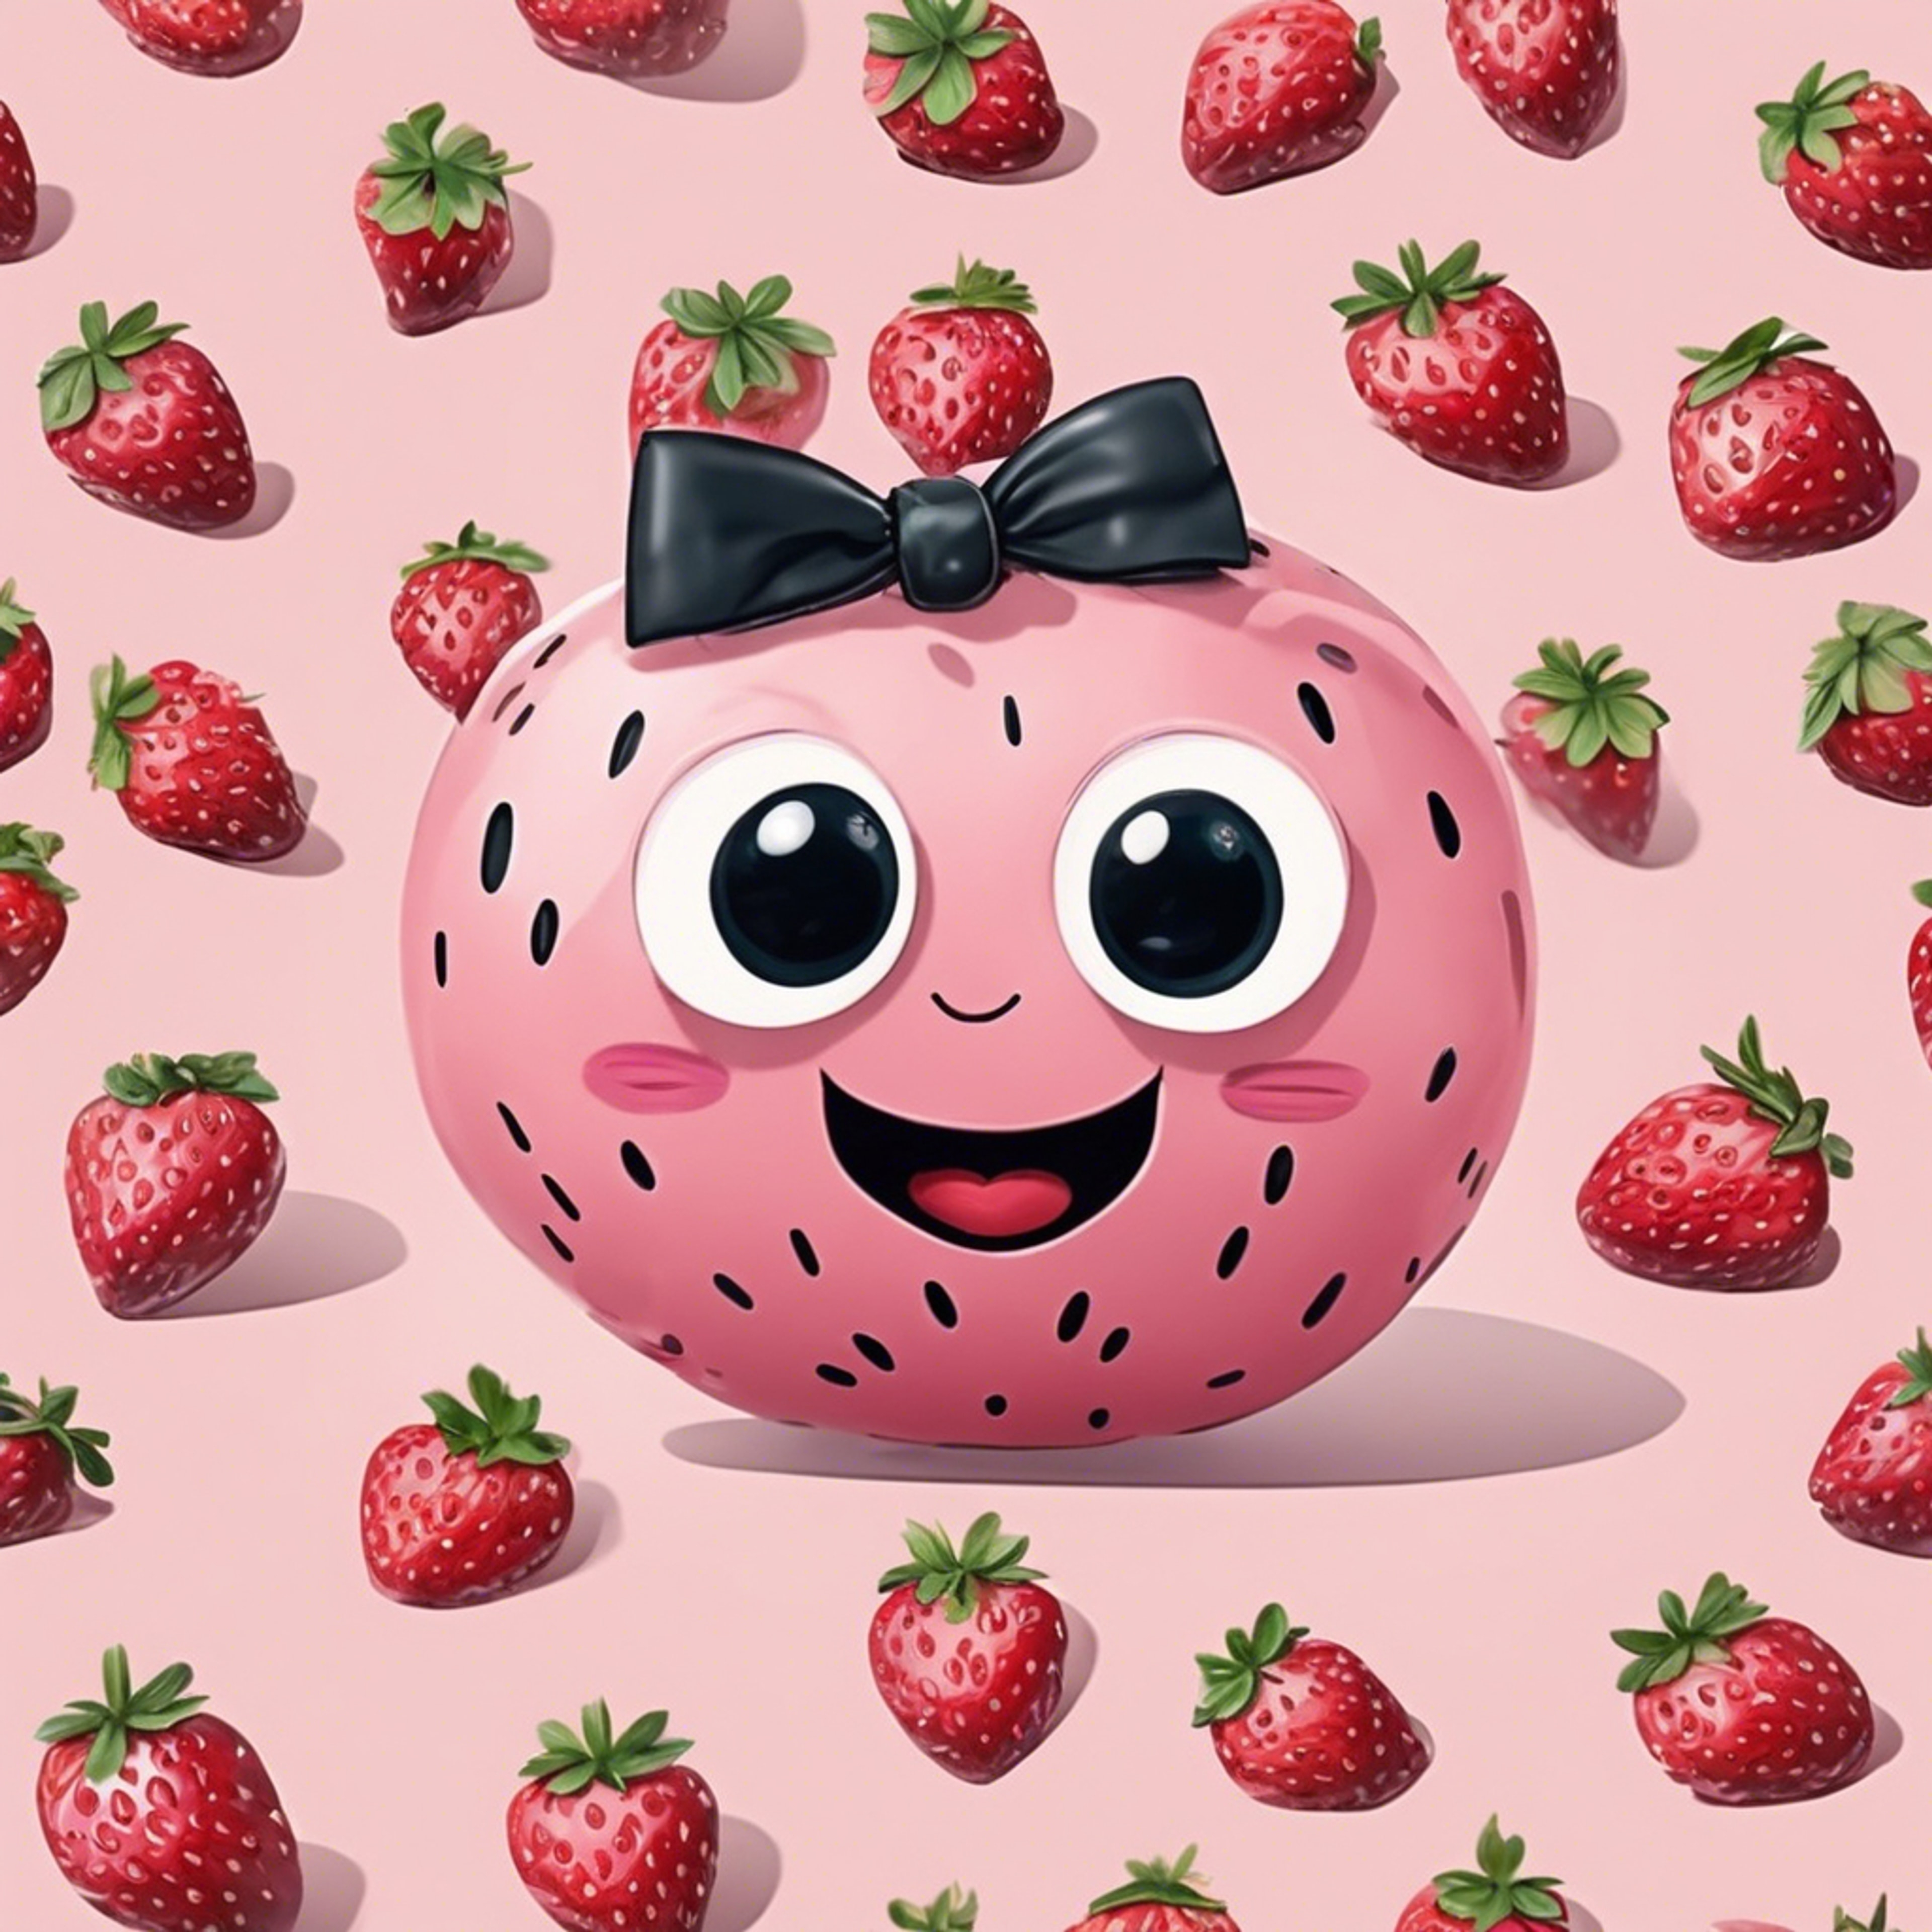 Cute, smiling light pink kawaii strawberries with big eyes and little bow ties. Wallpaper[24a5e2efca874b08b7f4]